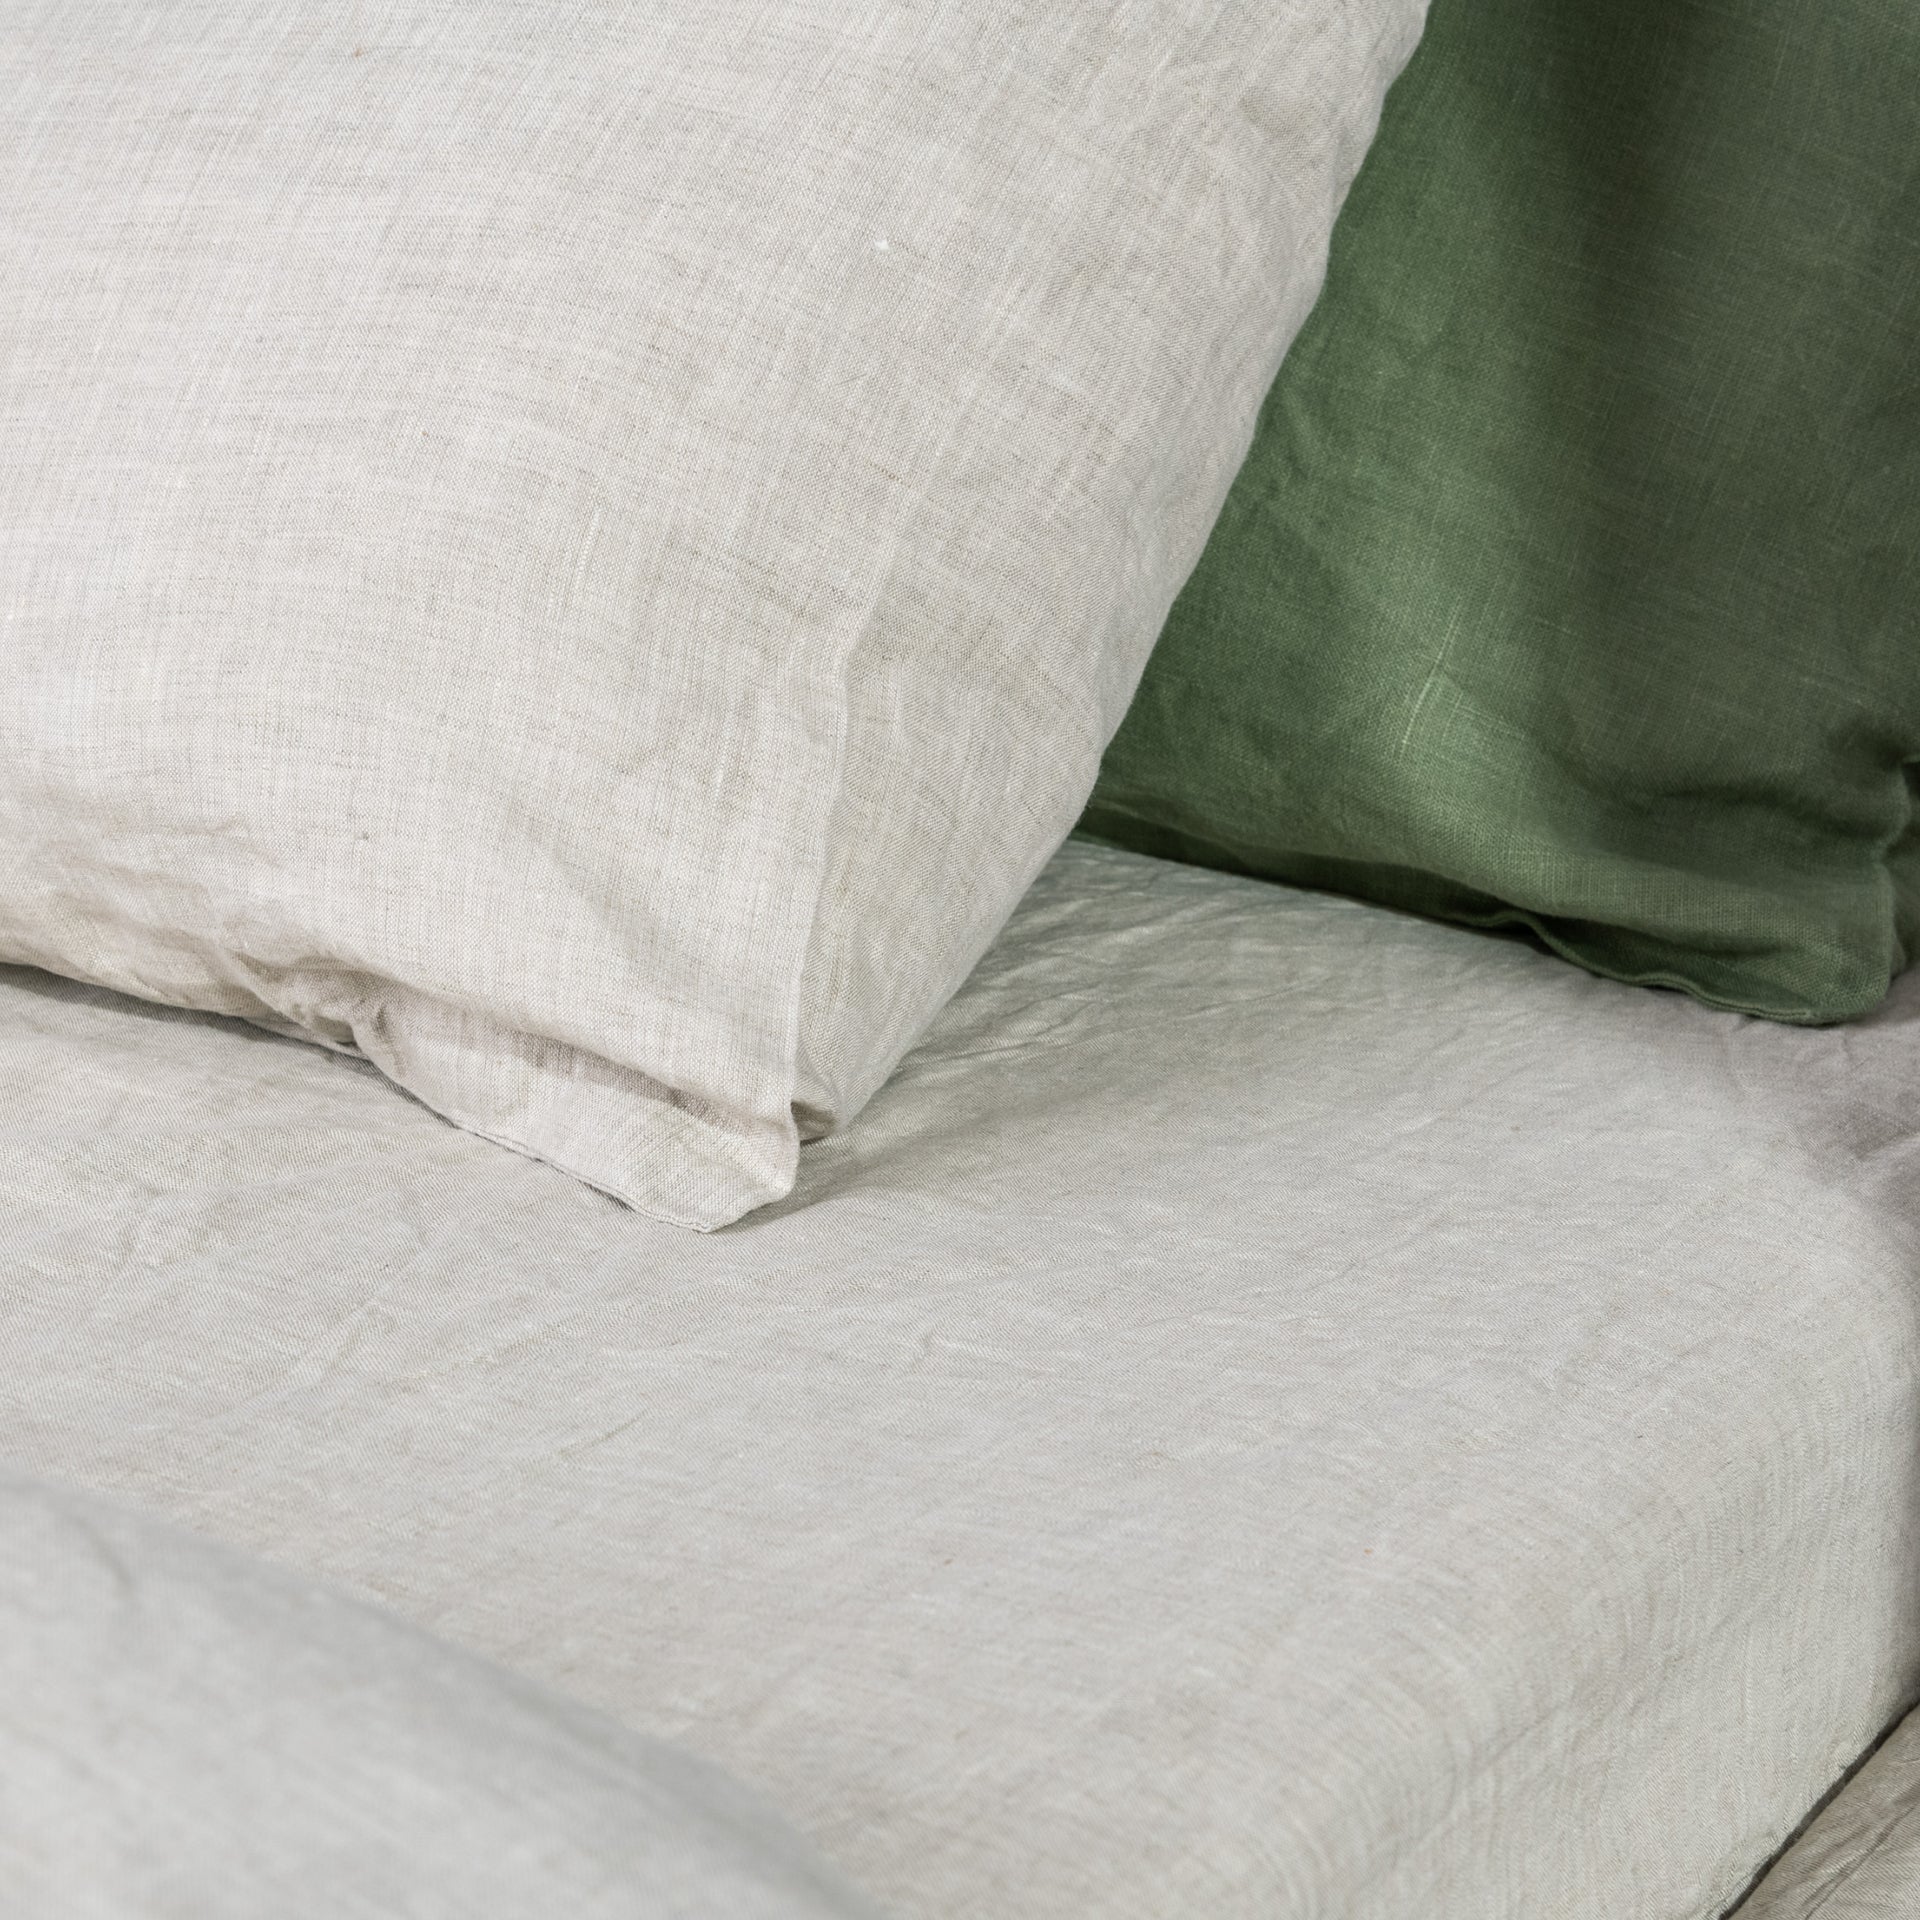 Pillowcase in Natural Color